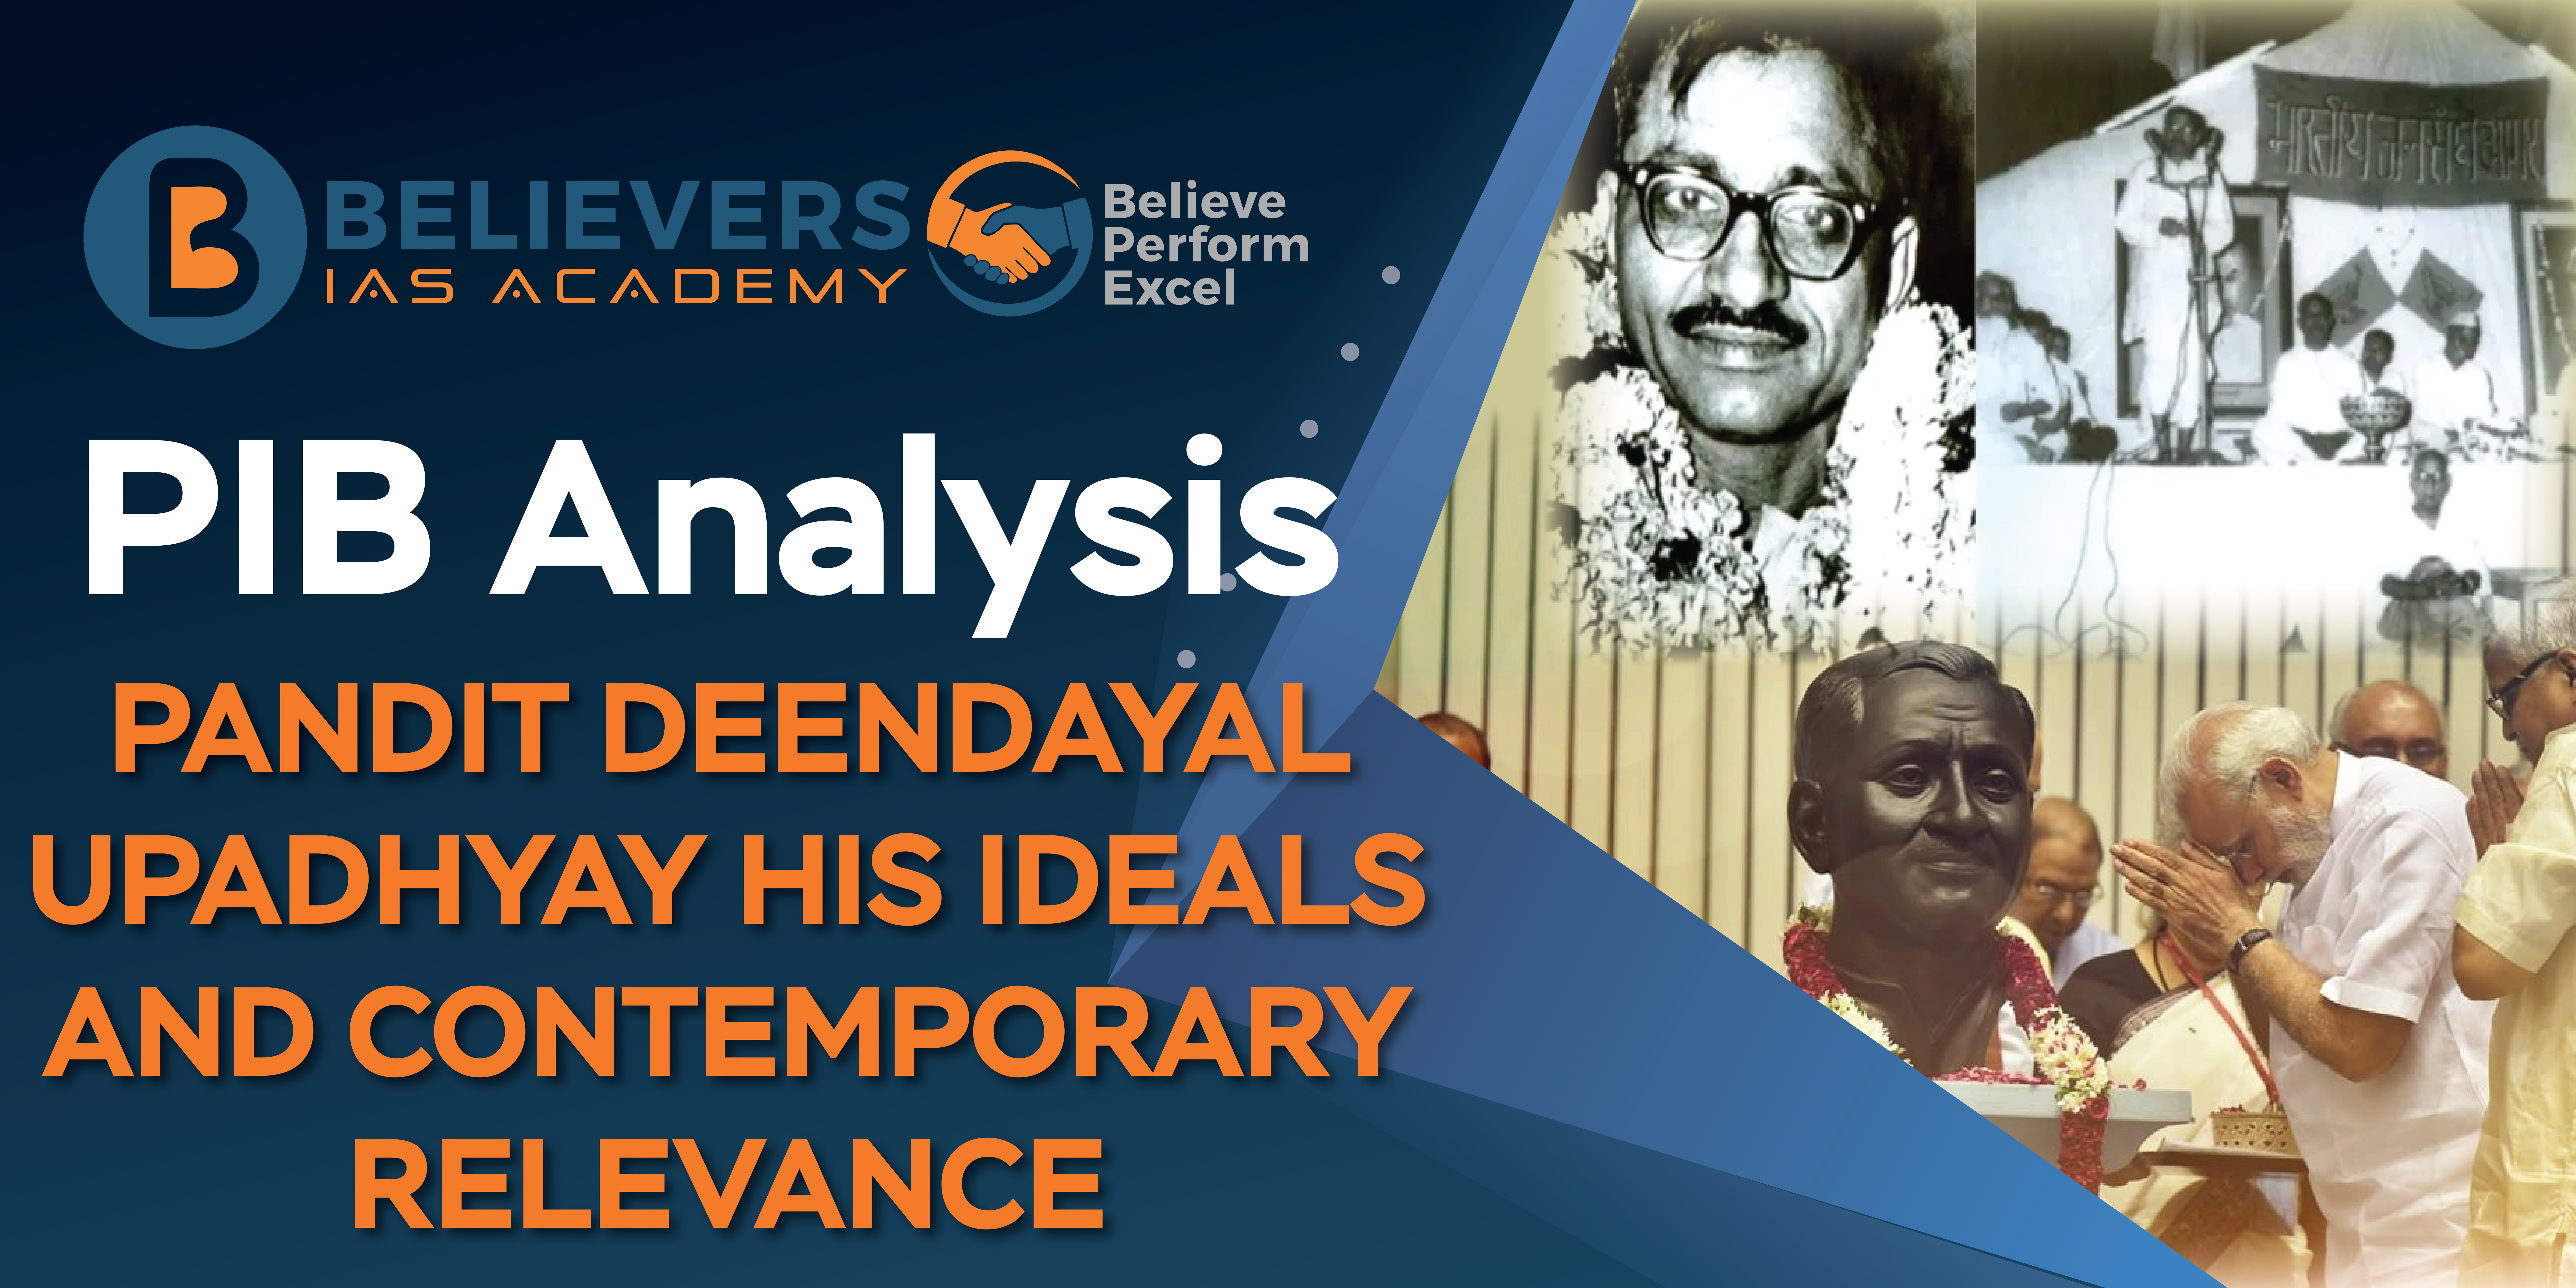 Pandit Deendayal Upadhyay: His Ideals and Contemporary Relevance